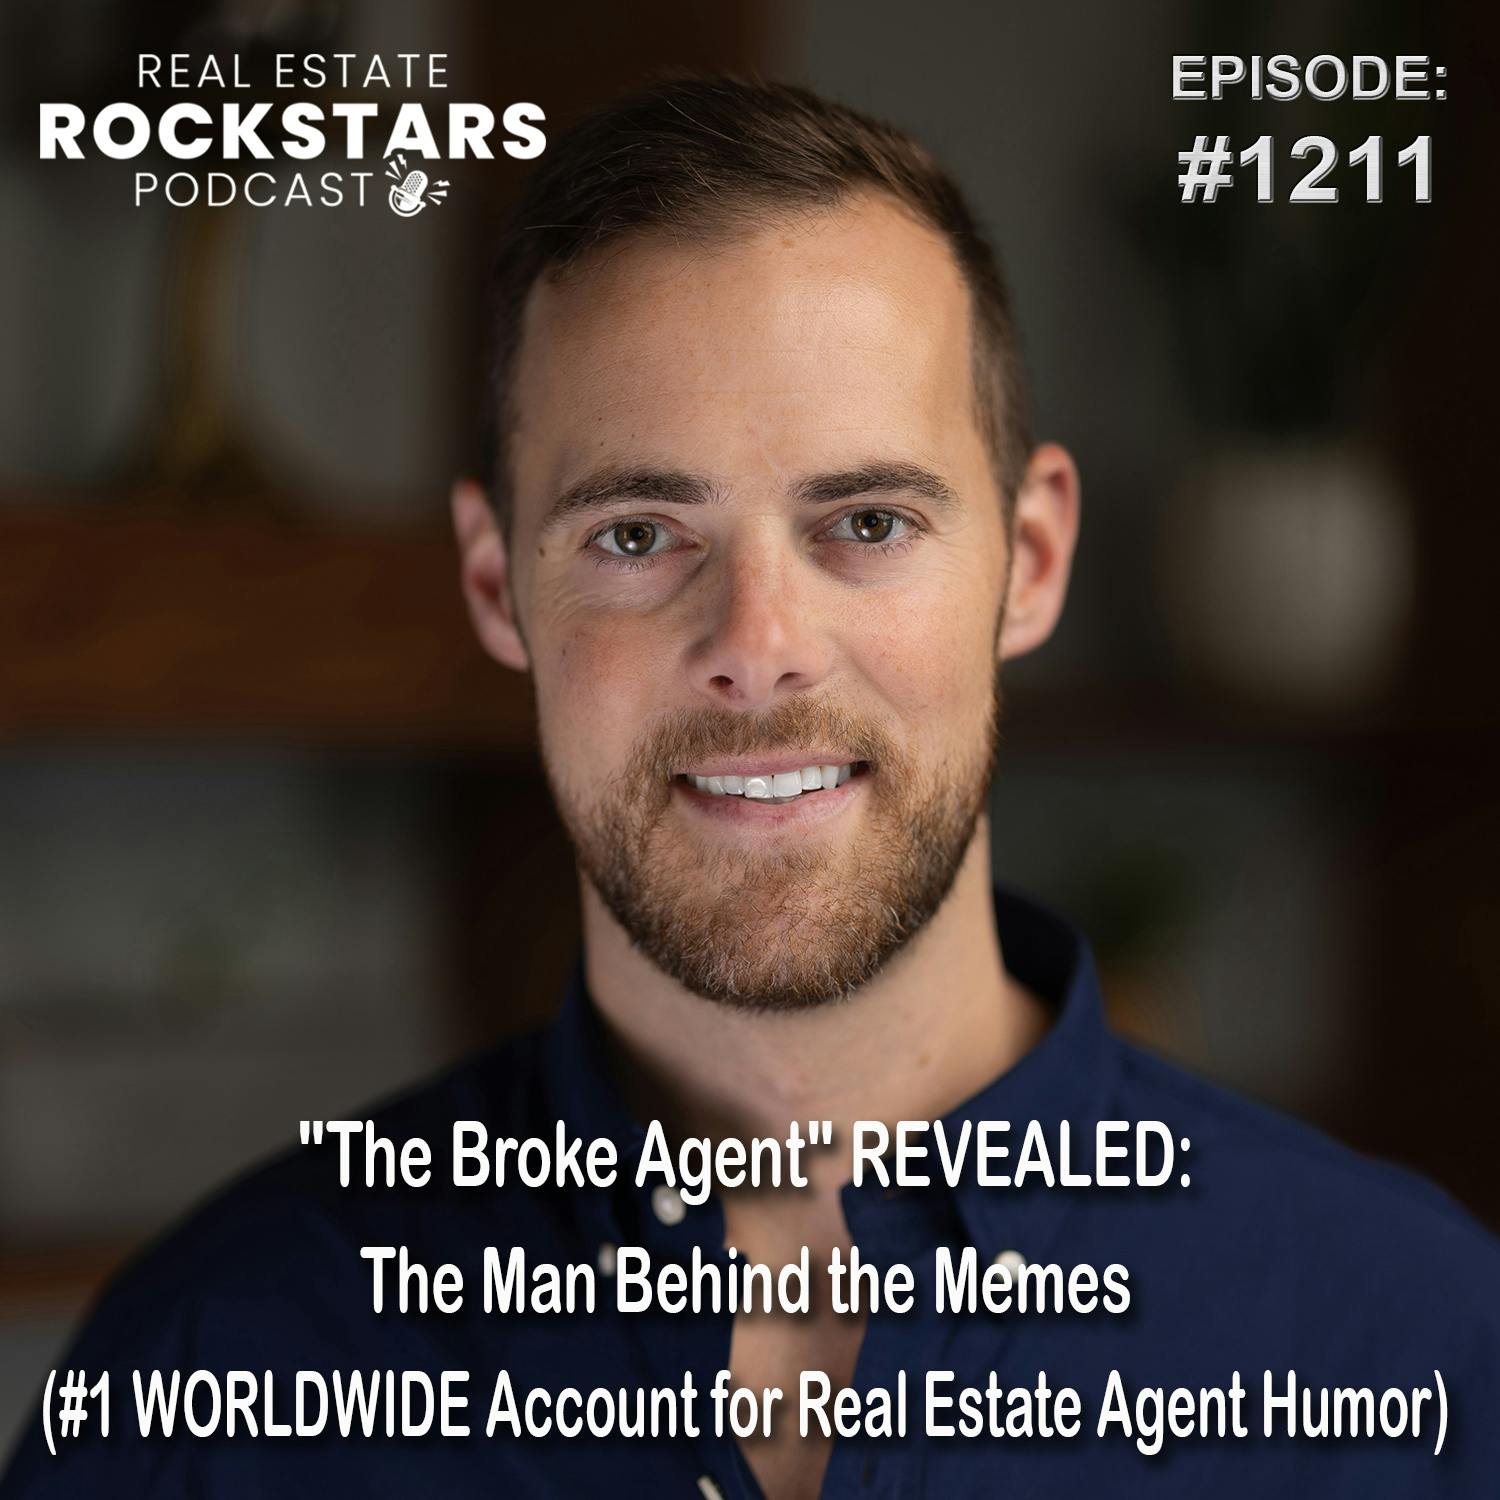 1211: ”The Broke Agent” REVEALED: The Man Behind the Memes (#1 WORLDWIDE Account for Real Estate Agent Humor)